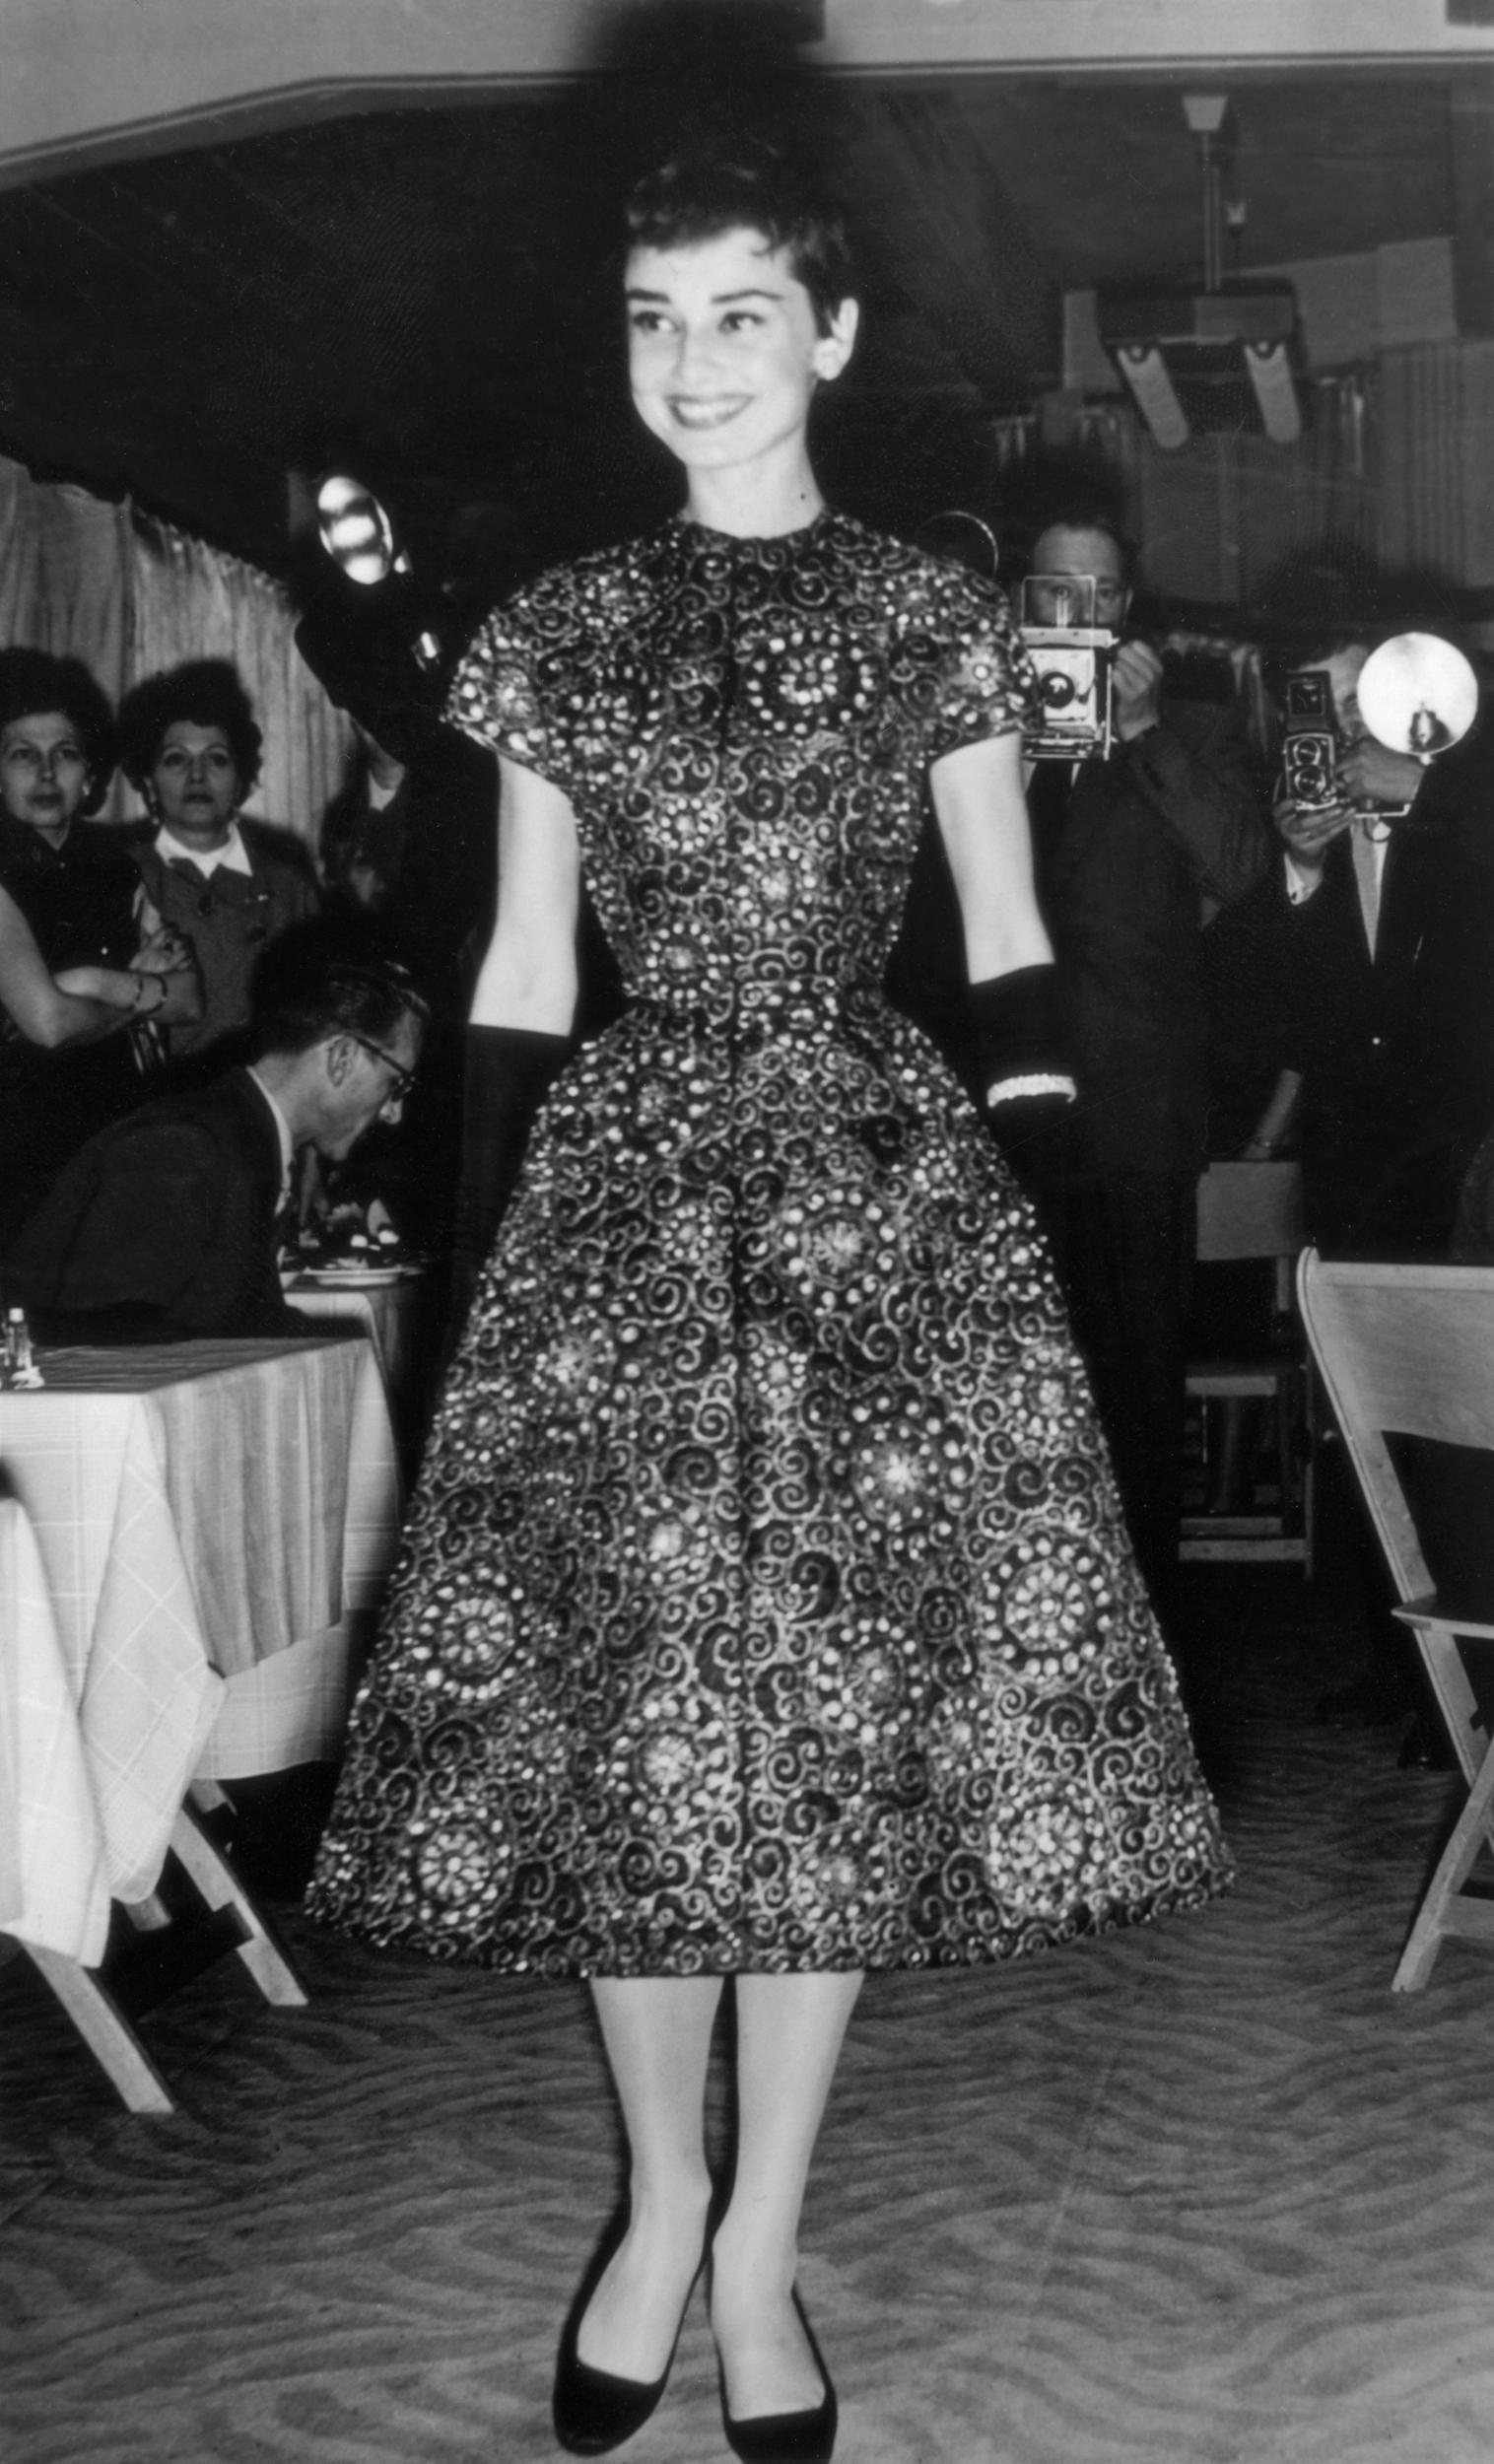 Audrey Hepburn in patterned dress at an Amsterdam fashion show, November 1954